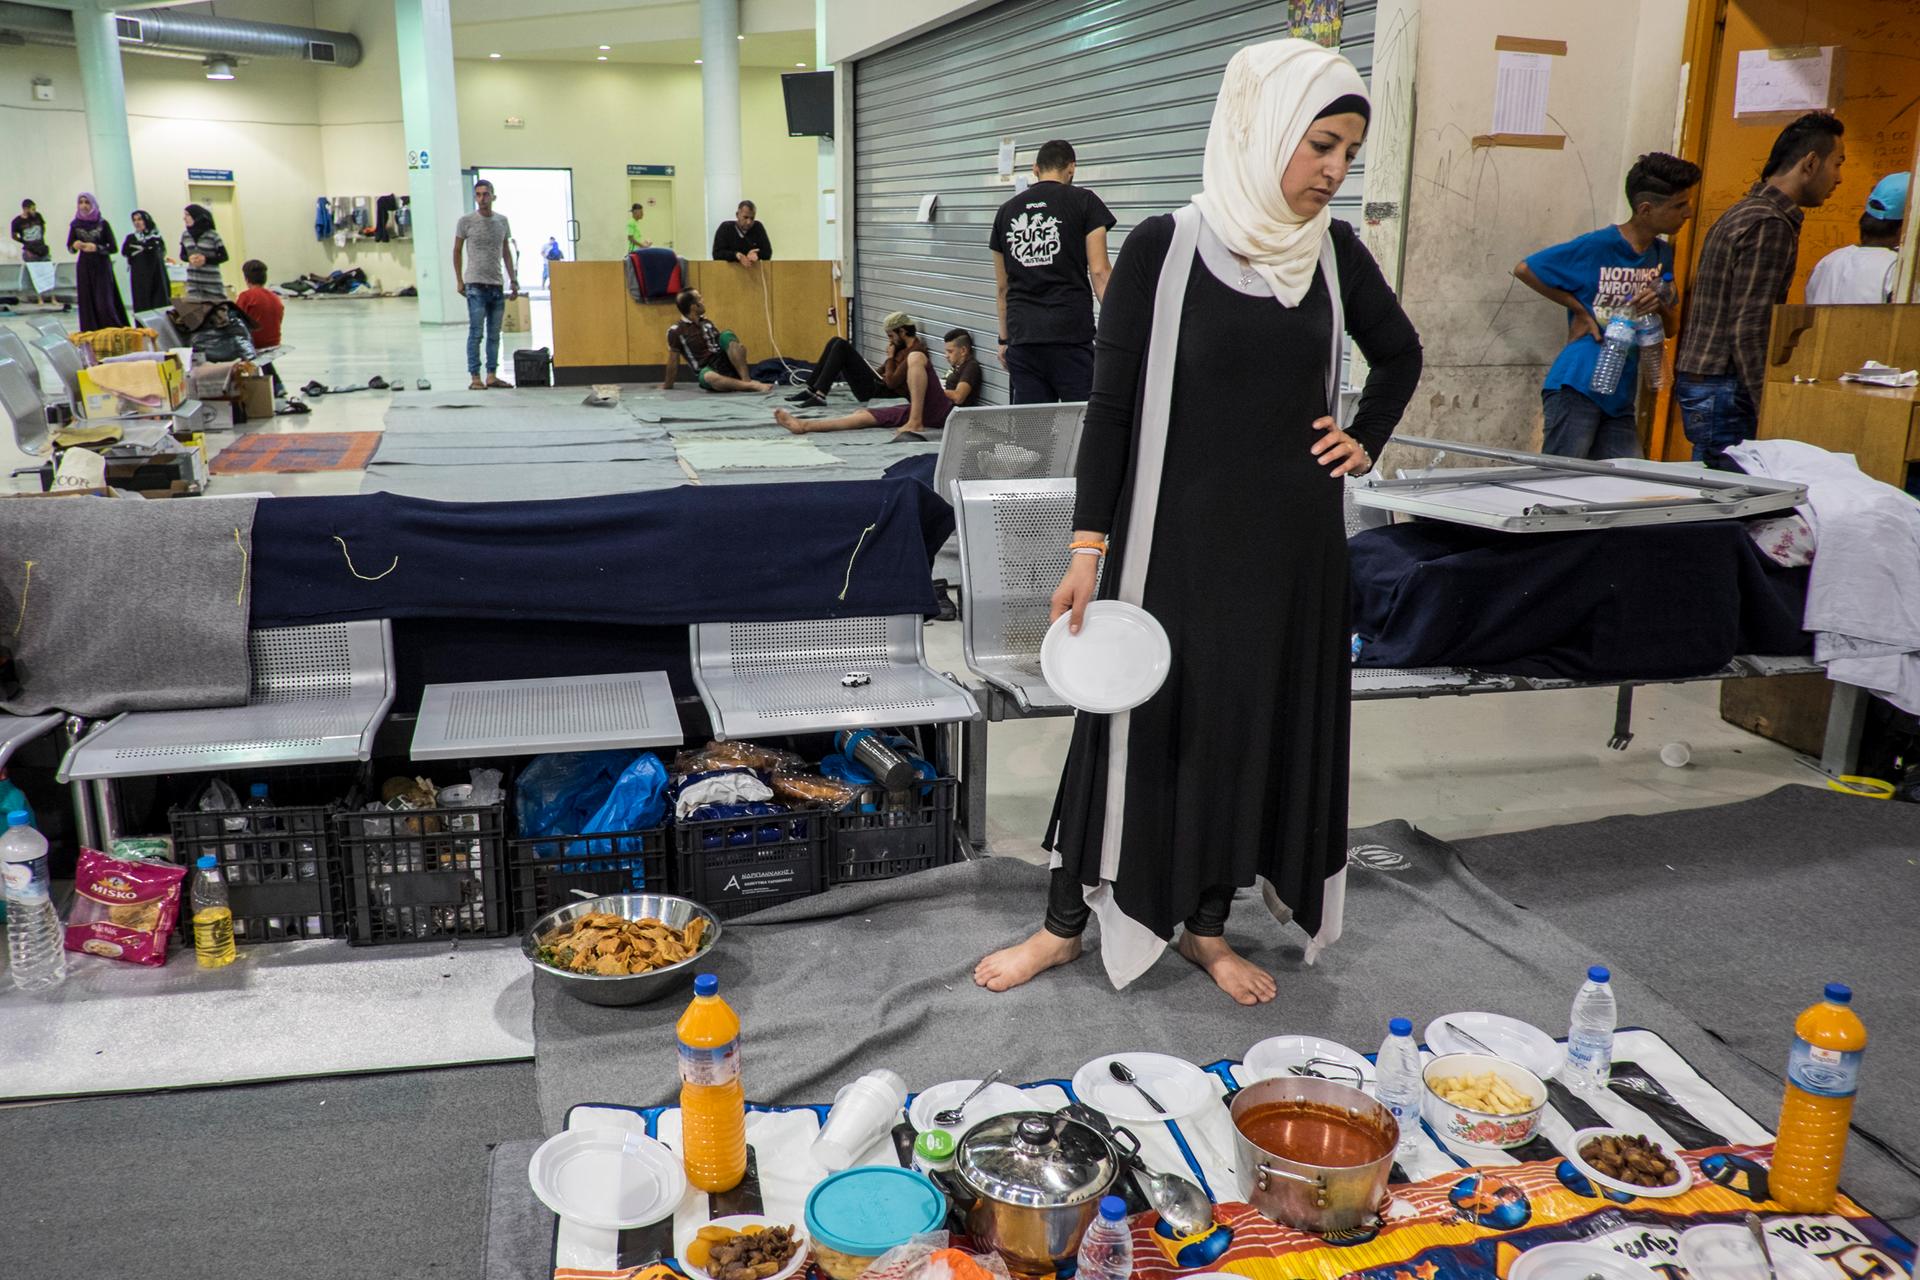 Renna Ramadan prepared an iftar meal for her family, Syrians from Idlib who hoped to reach Northern Europe but instead are living in the passenger waiting area at Piraeus Port Terminal 1 in Athens, Greece. Several hundred refugees and migrants remain at P